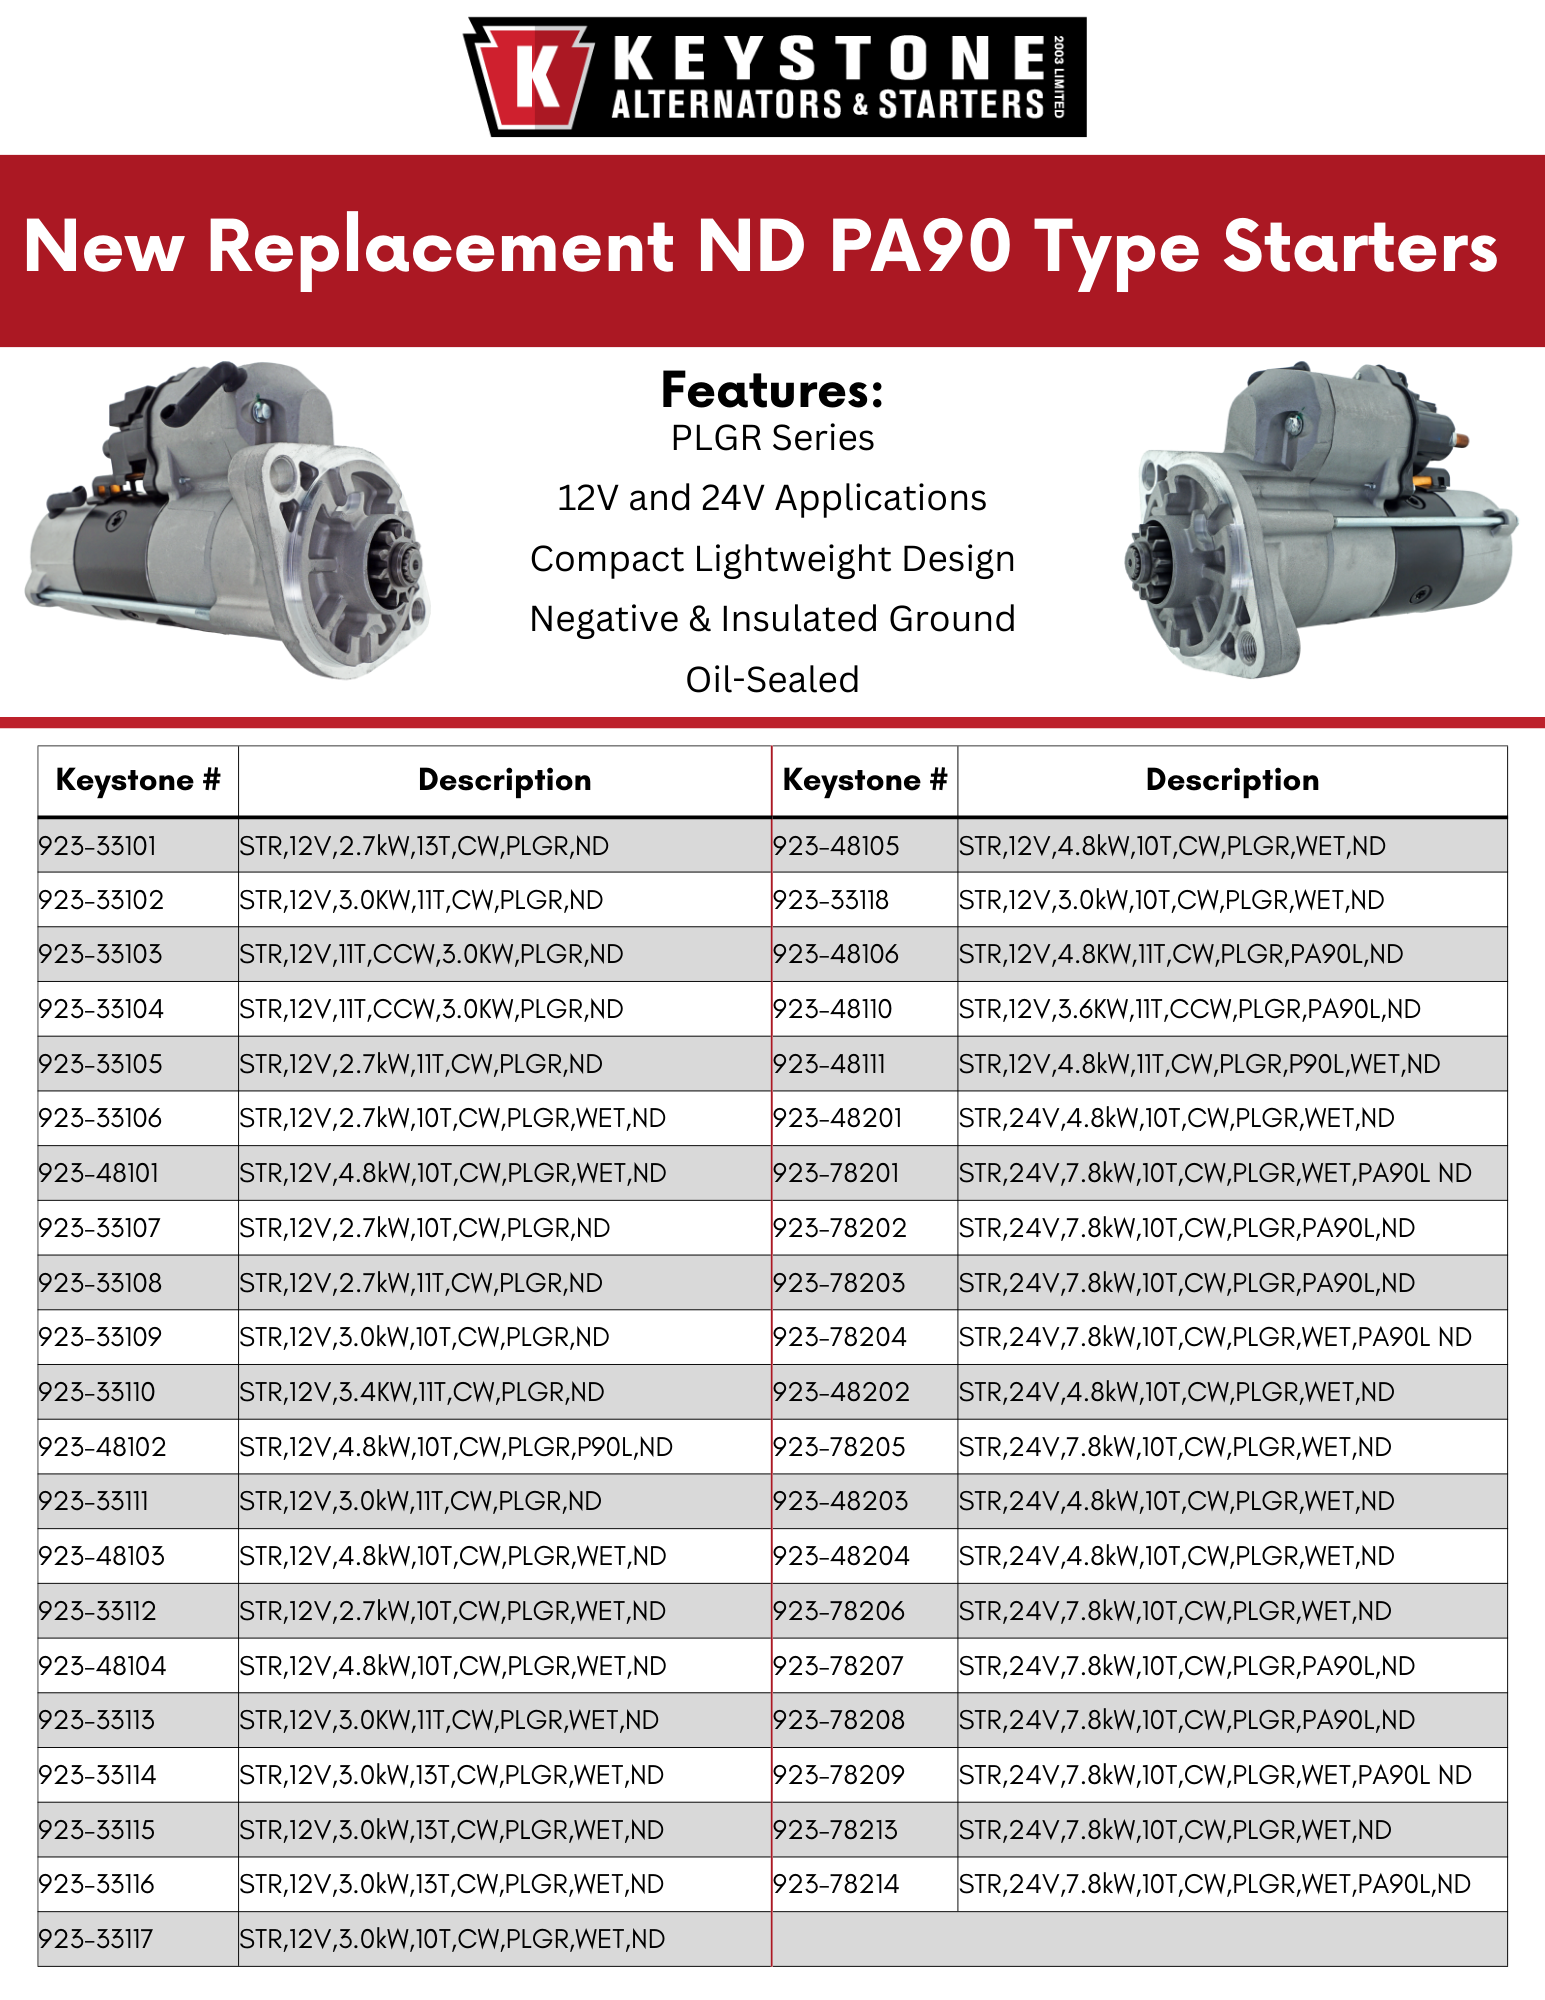 Downloadable PDF Buyers Guide for ND P90 Type Starters